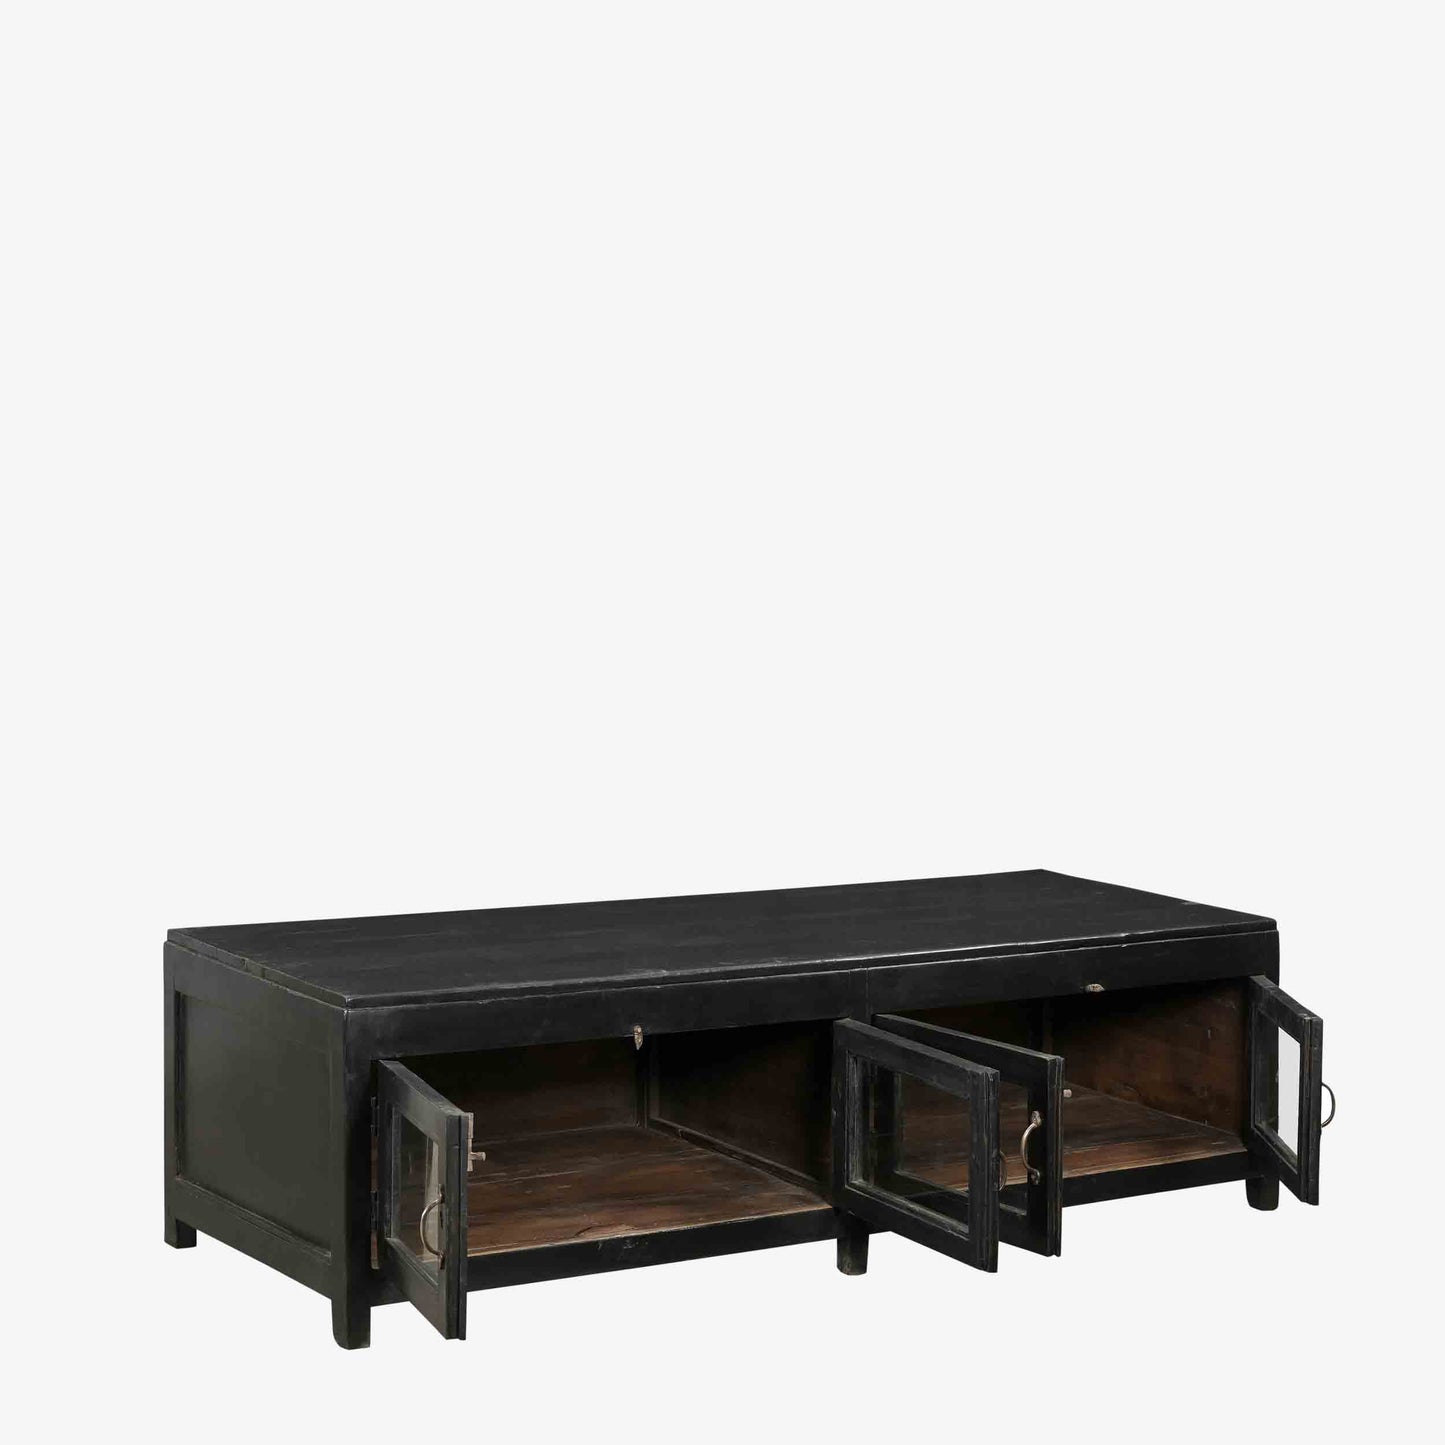 The Santry Antique Sideboard in Wild Black